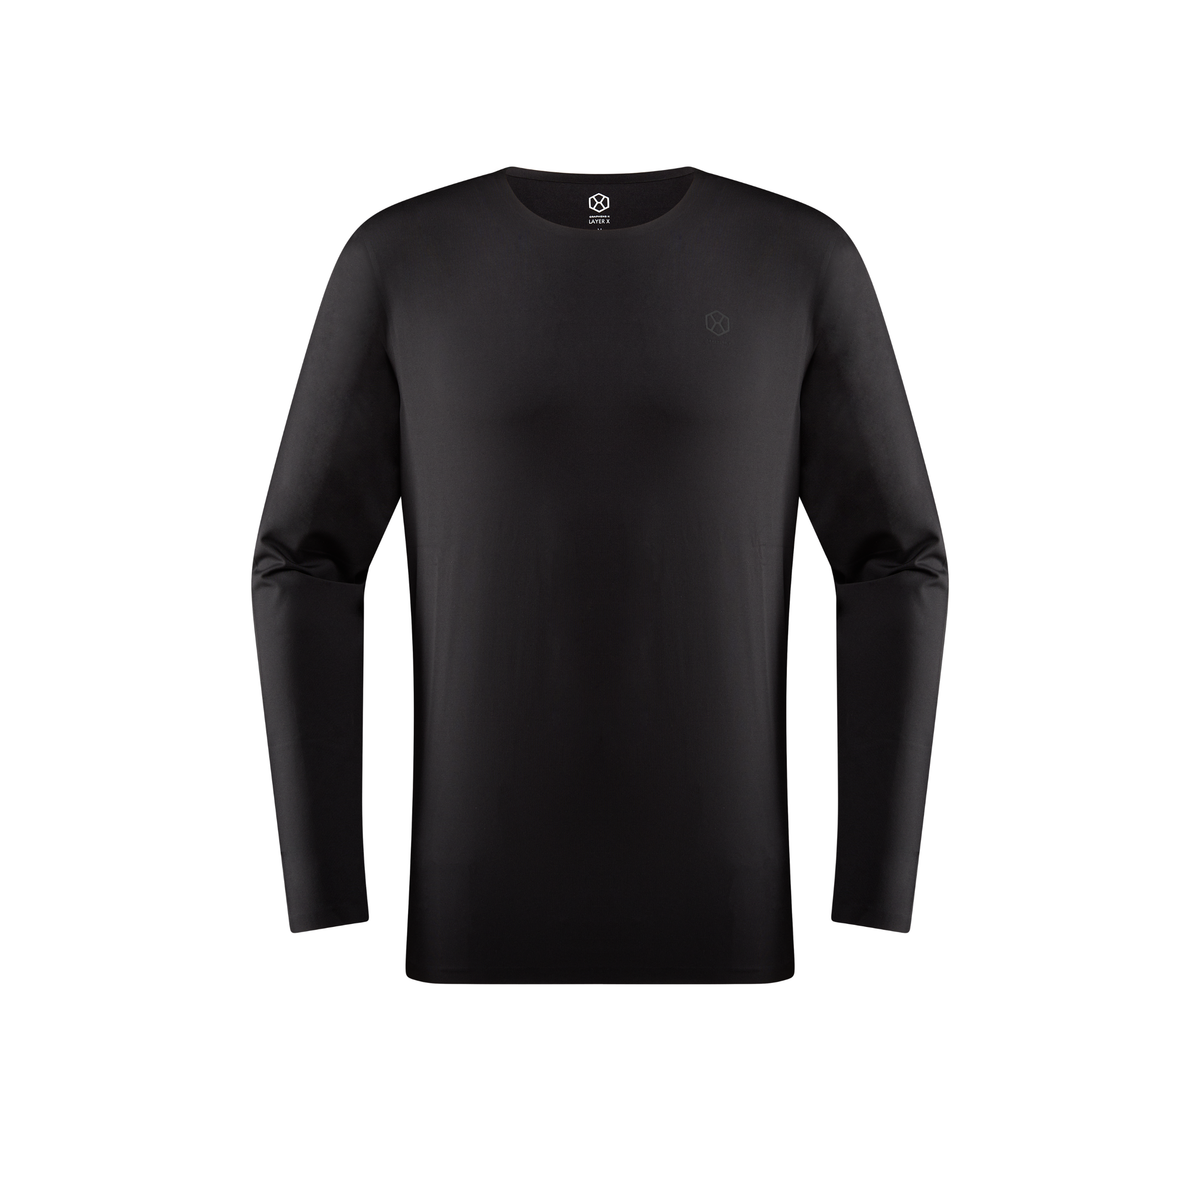 The undershirt - crew neck  slim fit Serie Dry Cotton Functional